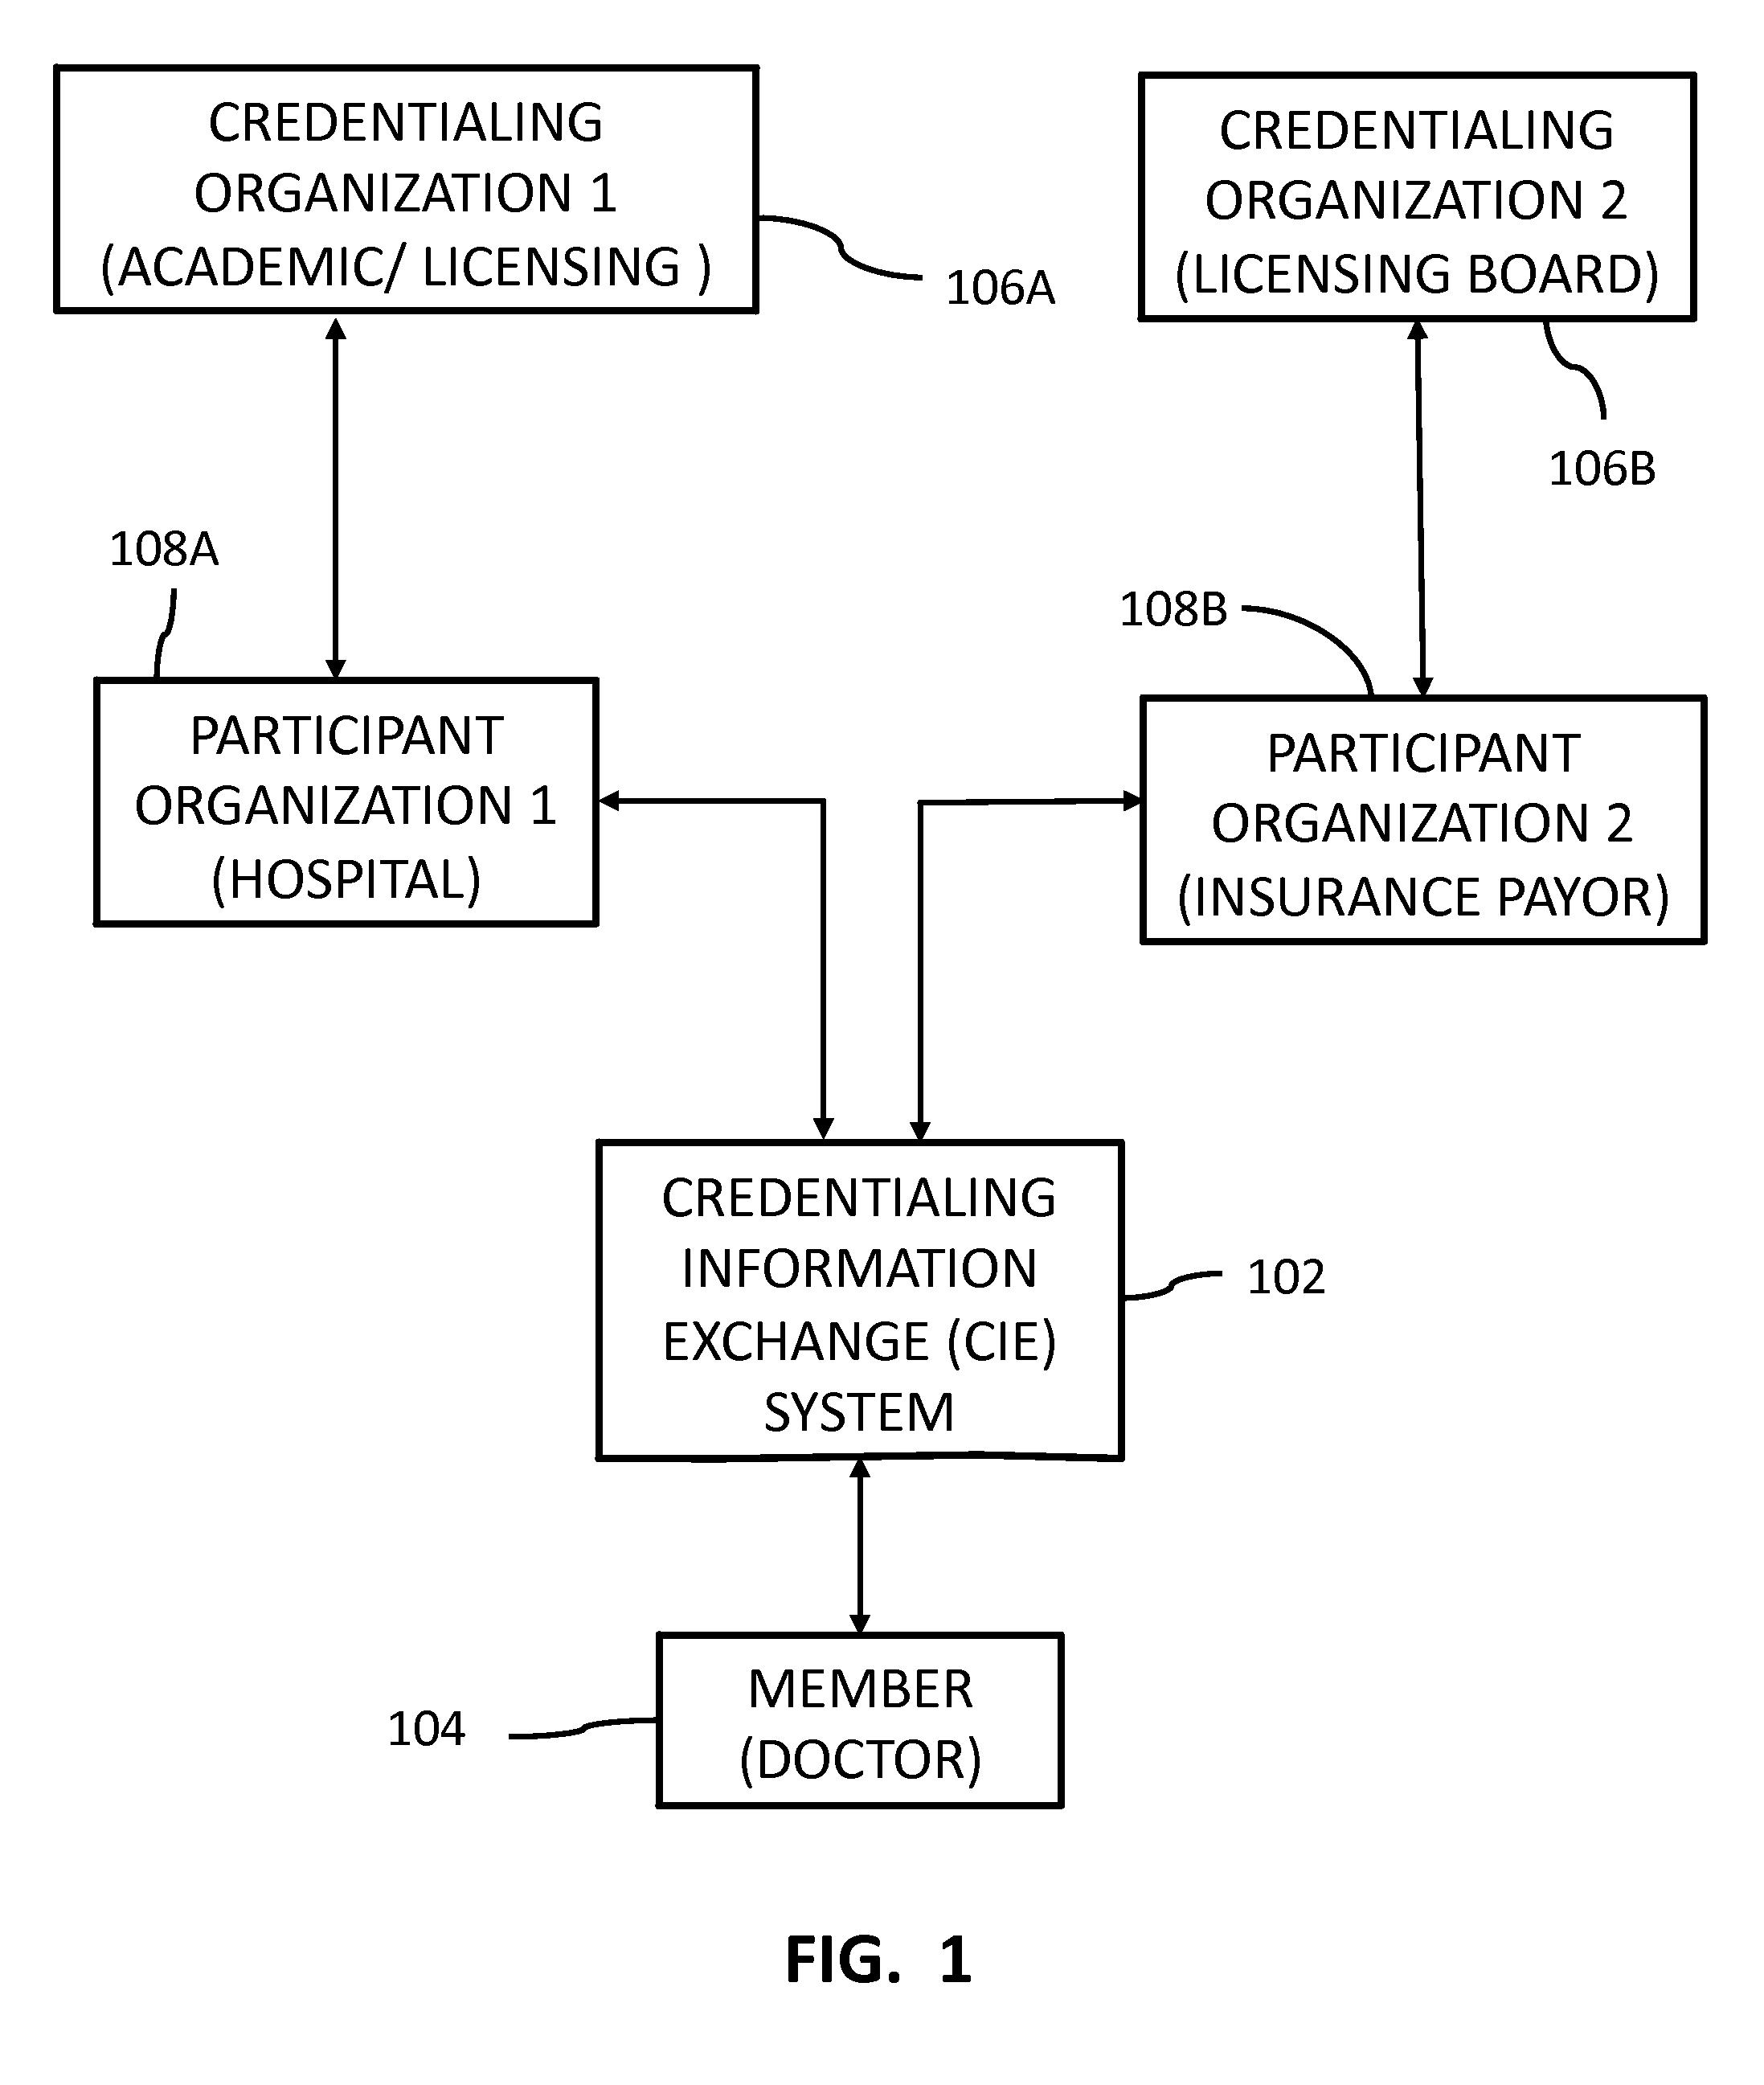 System and Method for Exchanging and Updating Credentialing Information